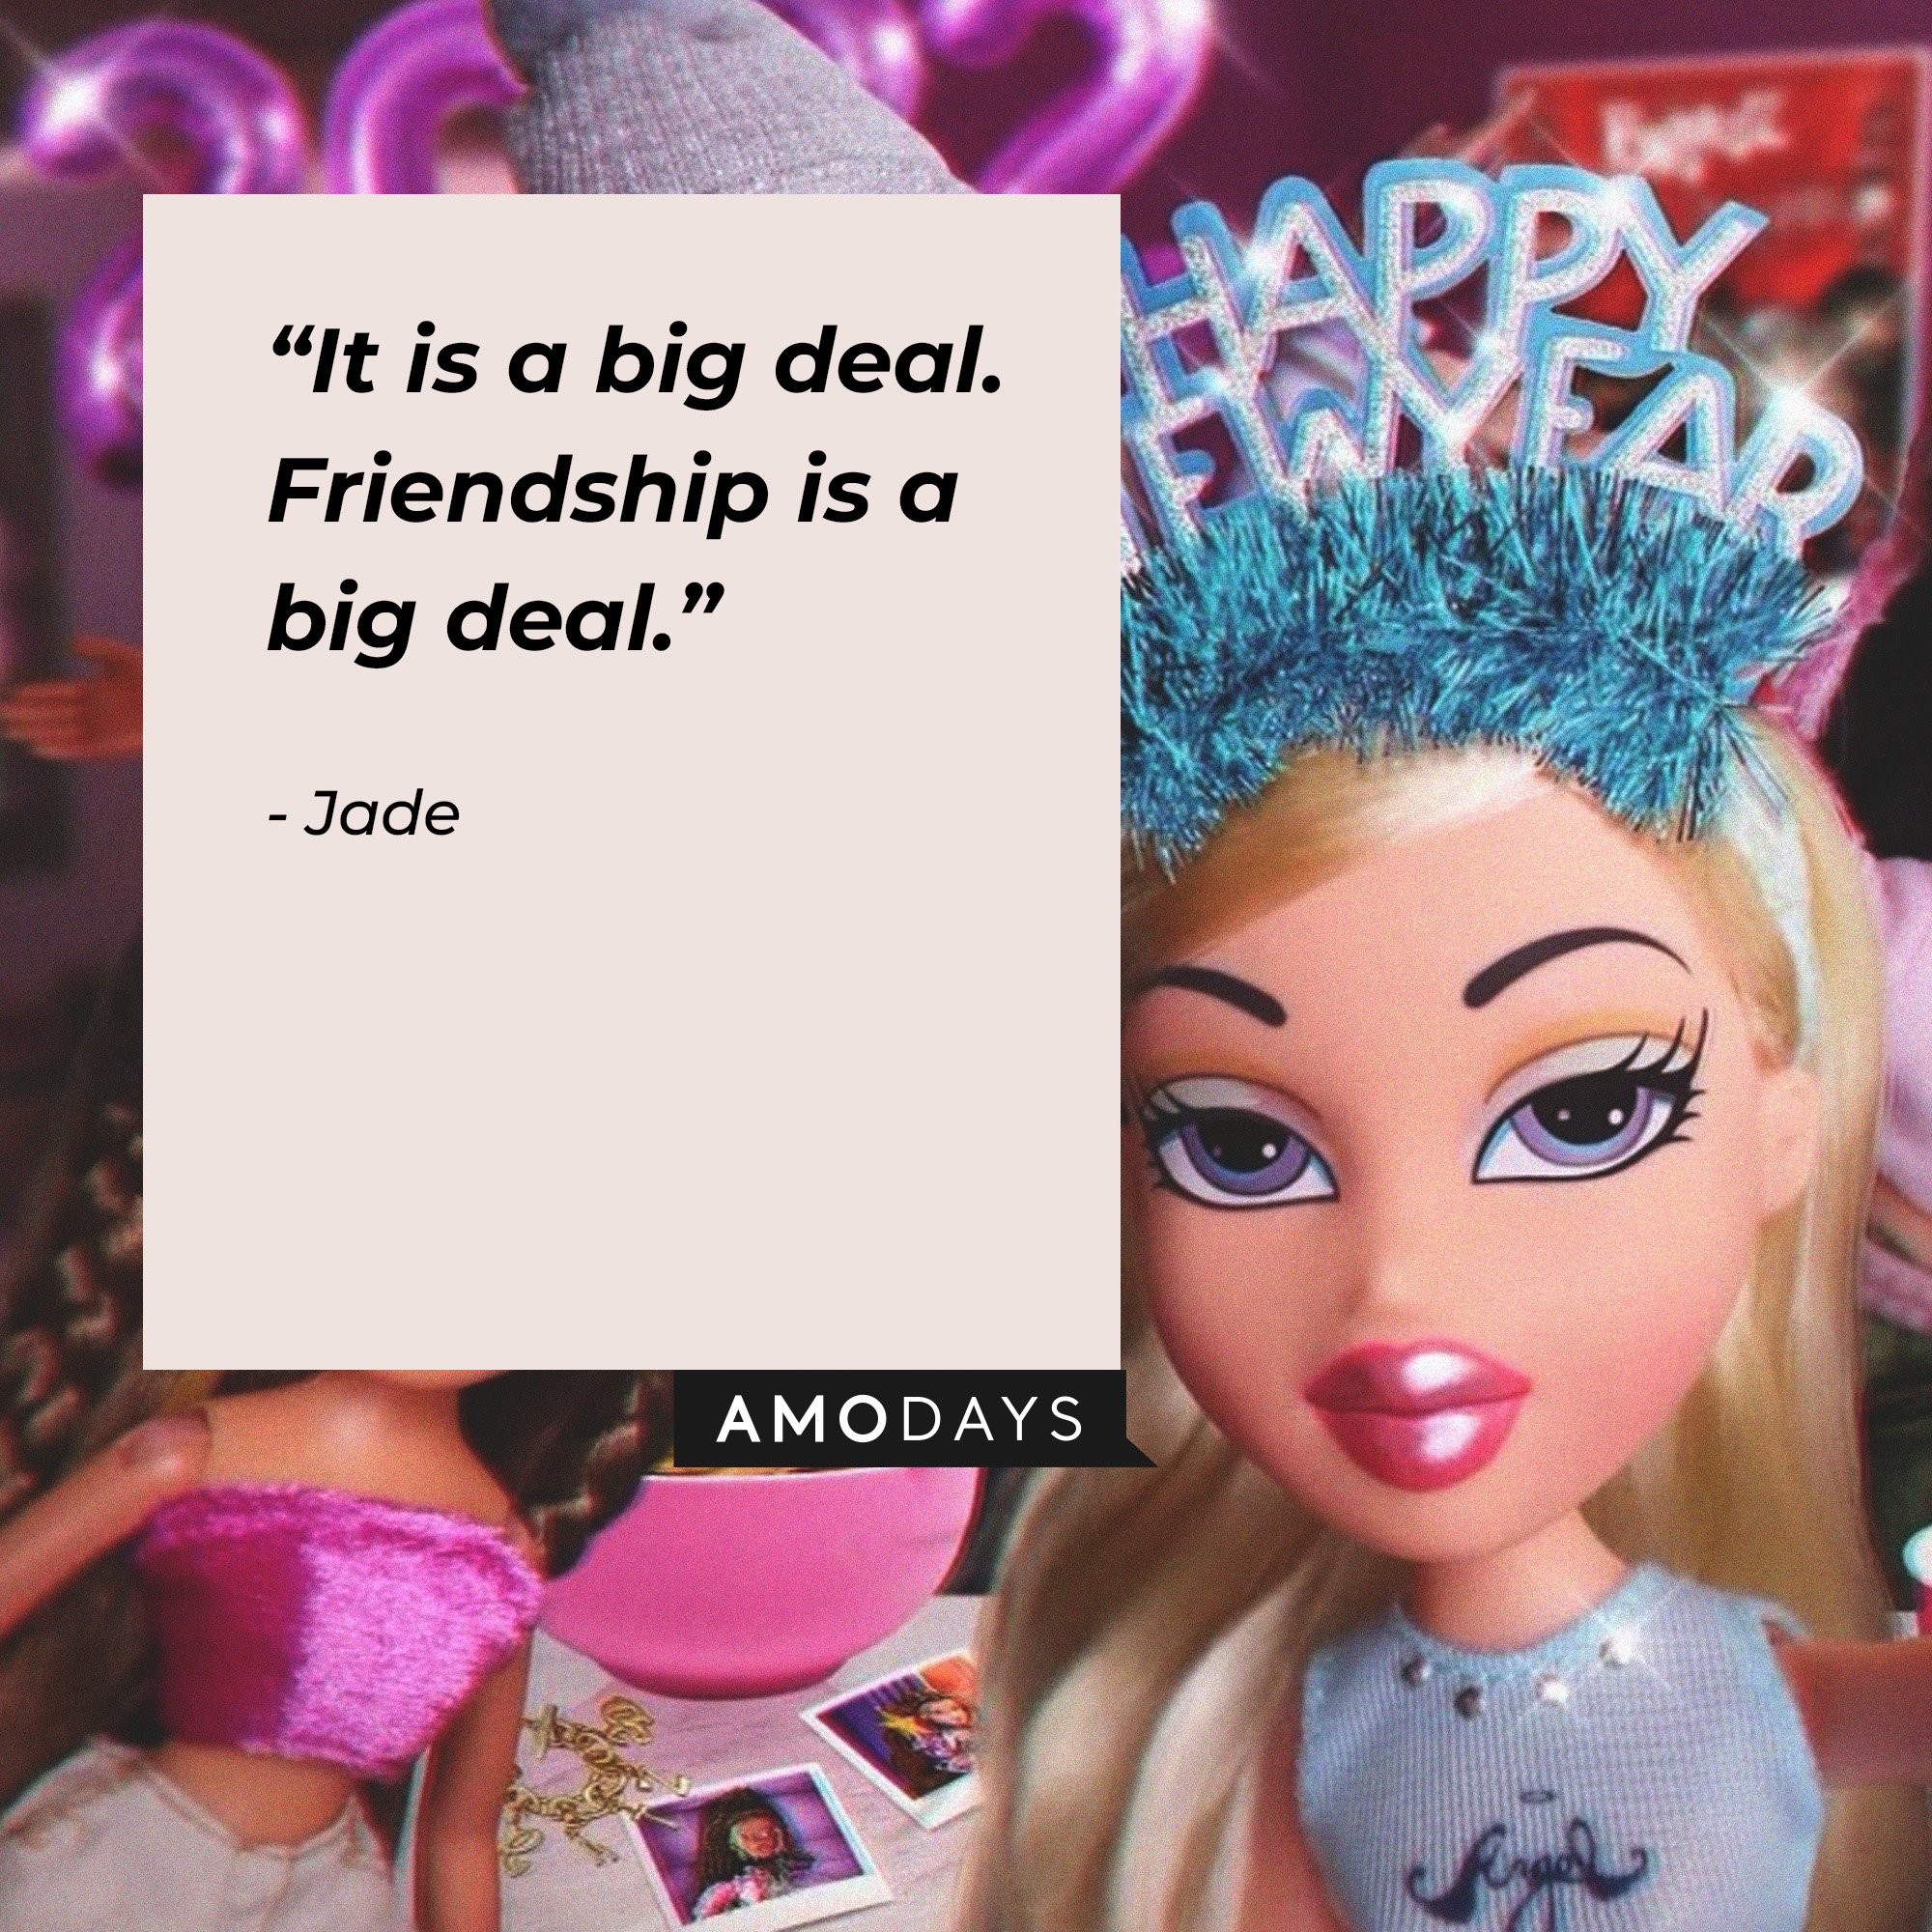 Jade's quote: “It is a big deal. Friendship is a big deal.” | Image: AmoDays